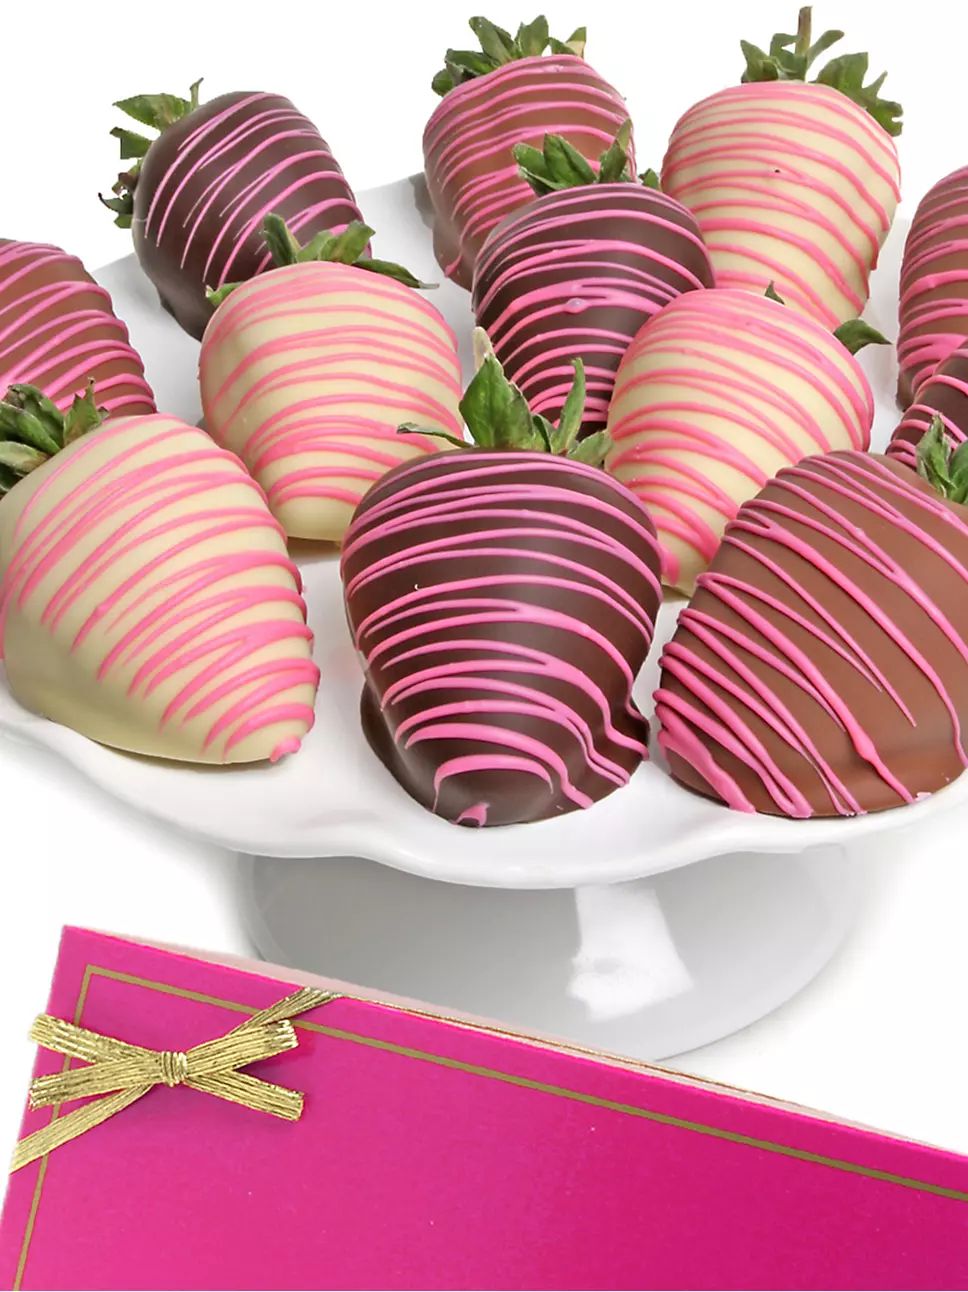 Pink Belgian Chocolate-Covered Strawberries | Saks Fifth Avenue